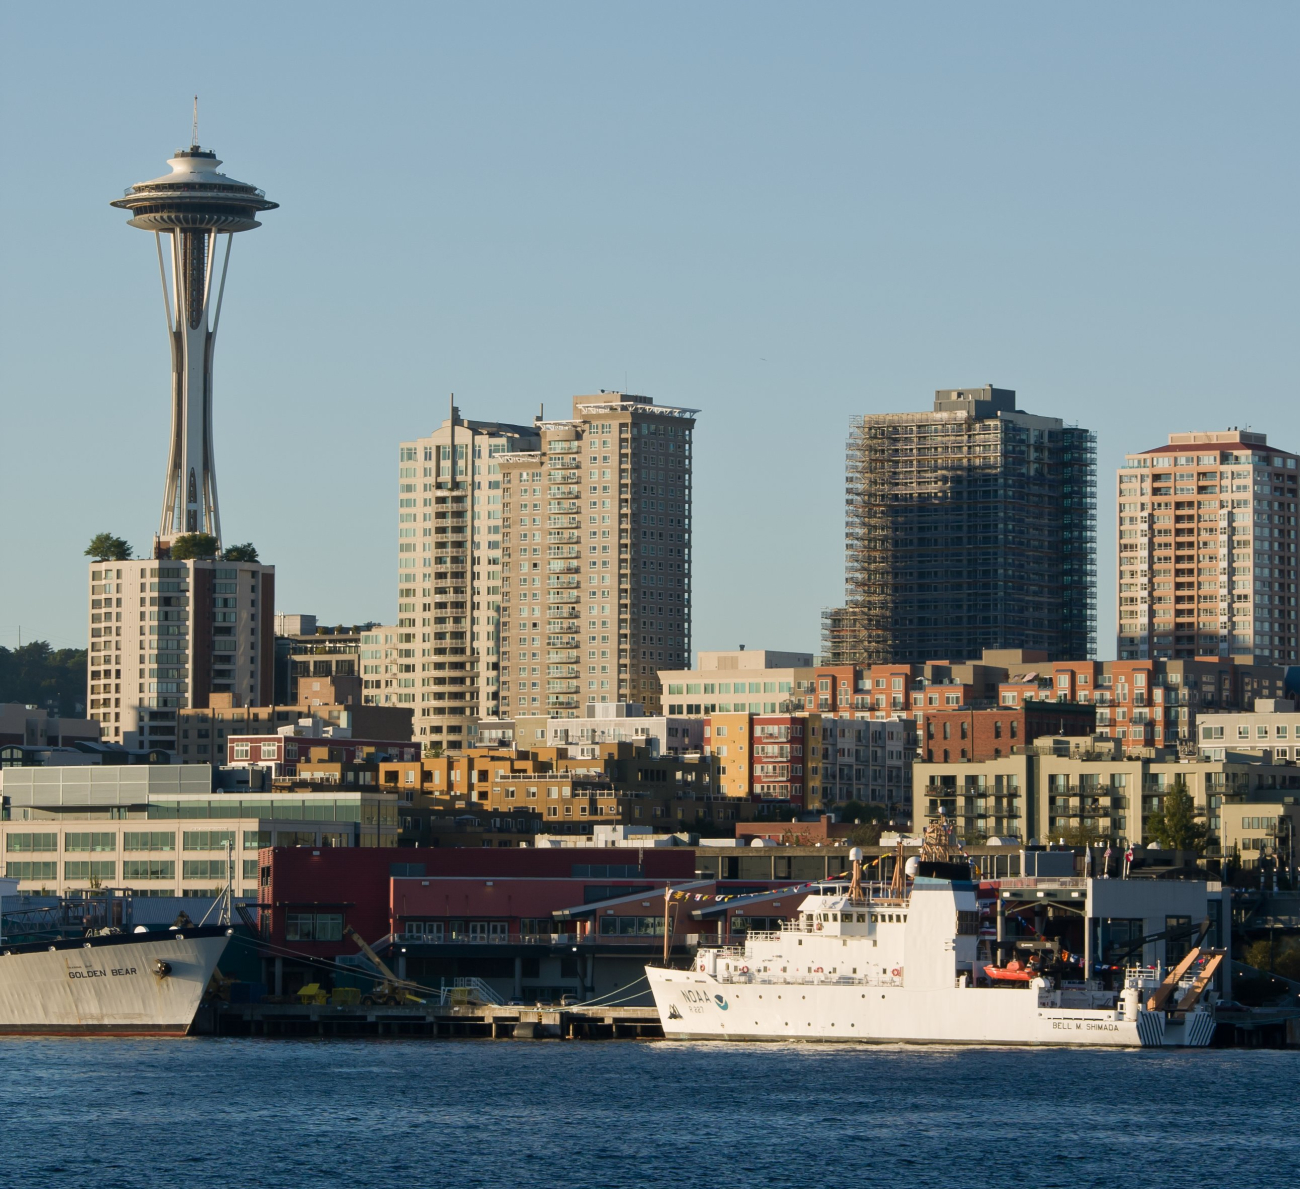 NOAA Ship BELL SHIMADA on Seattle waterfront prior to commissioningceremony